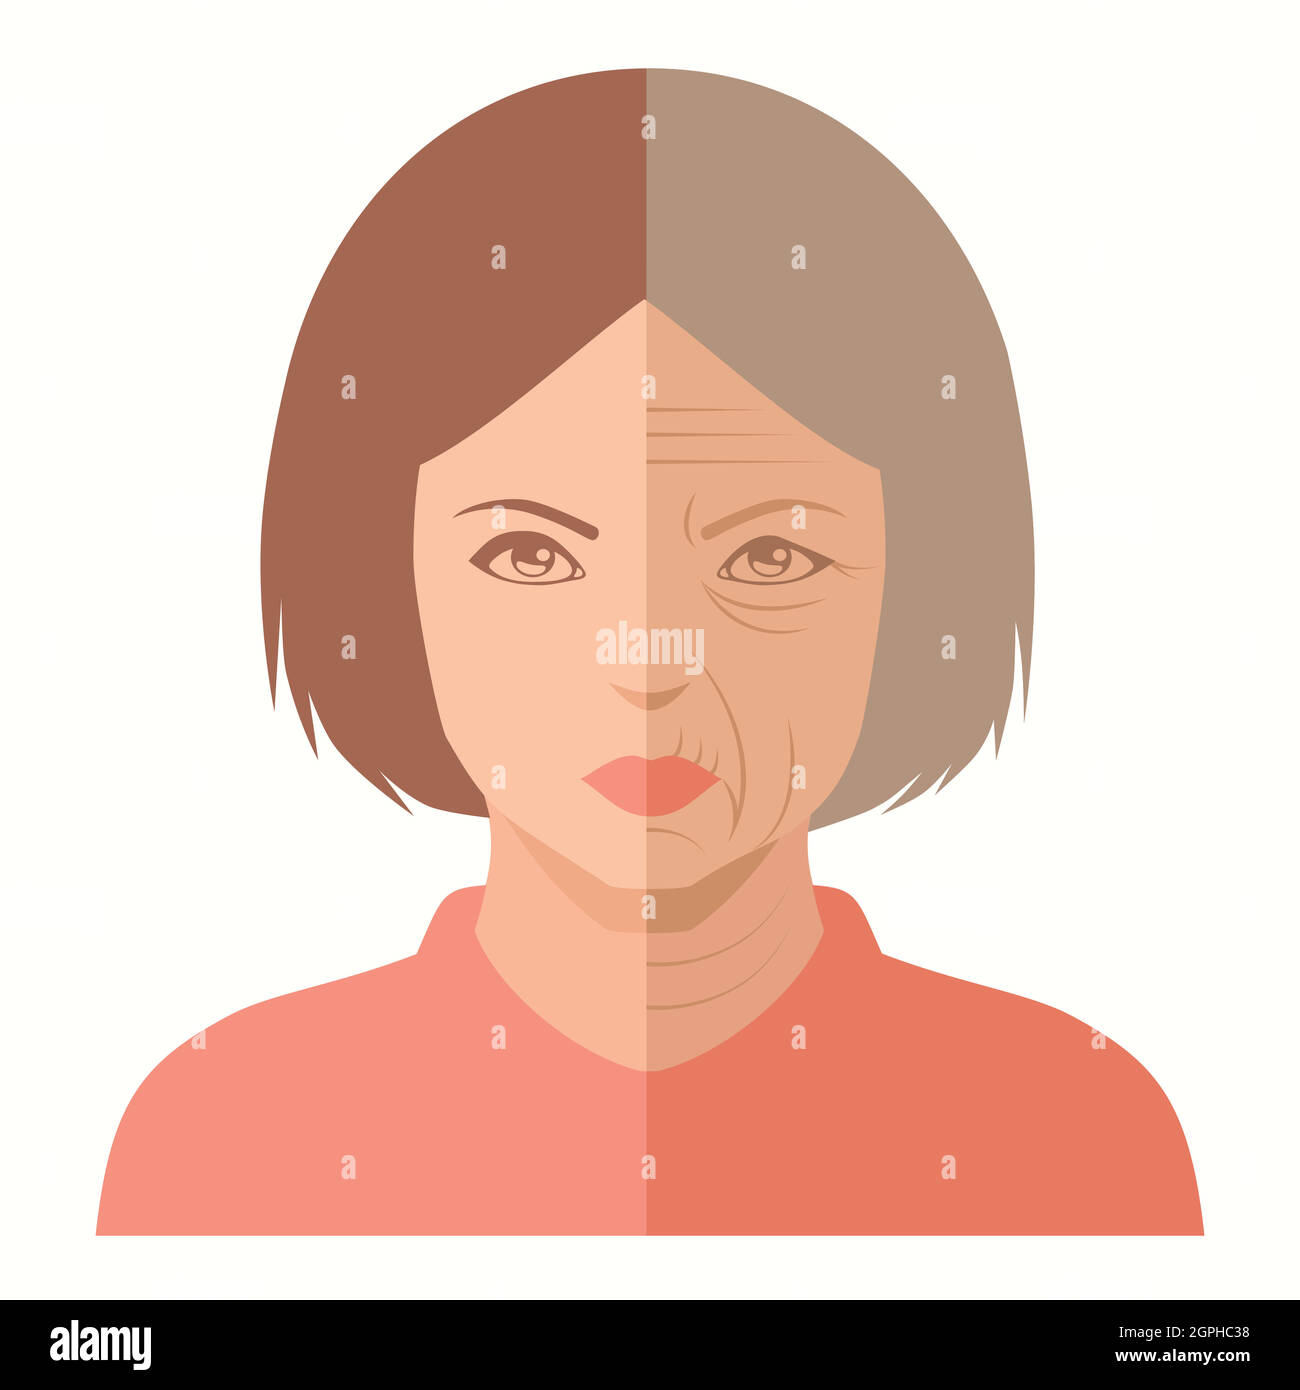 woman face, before and after aging Stock Vector